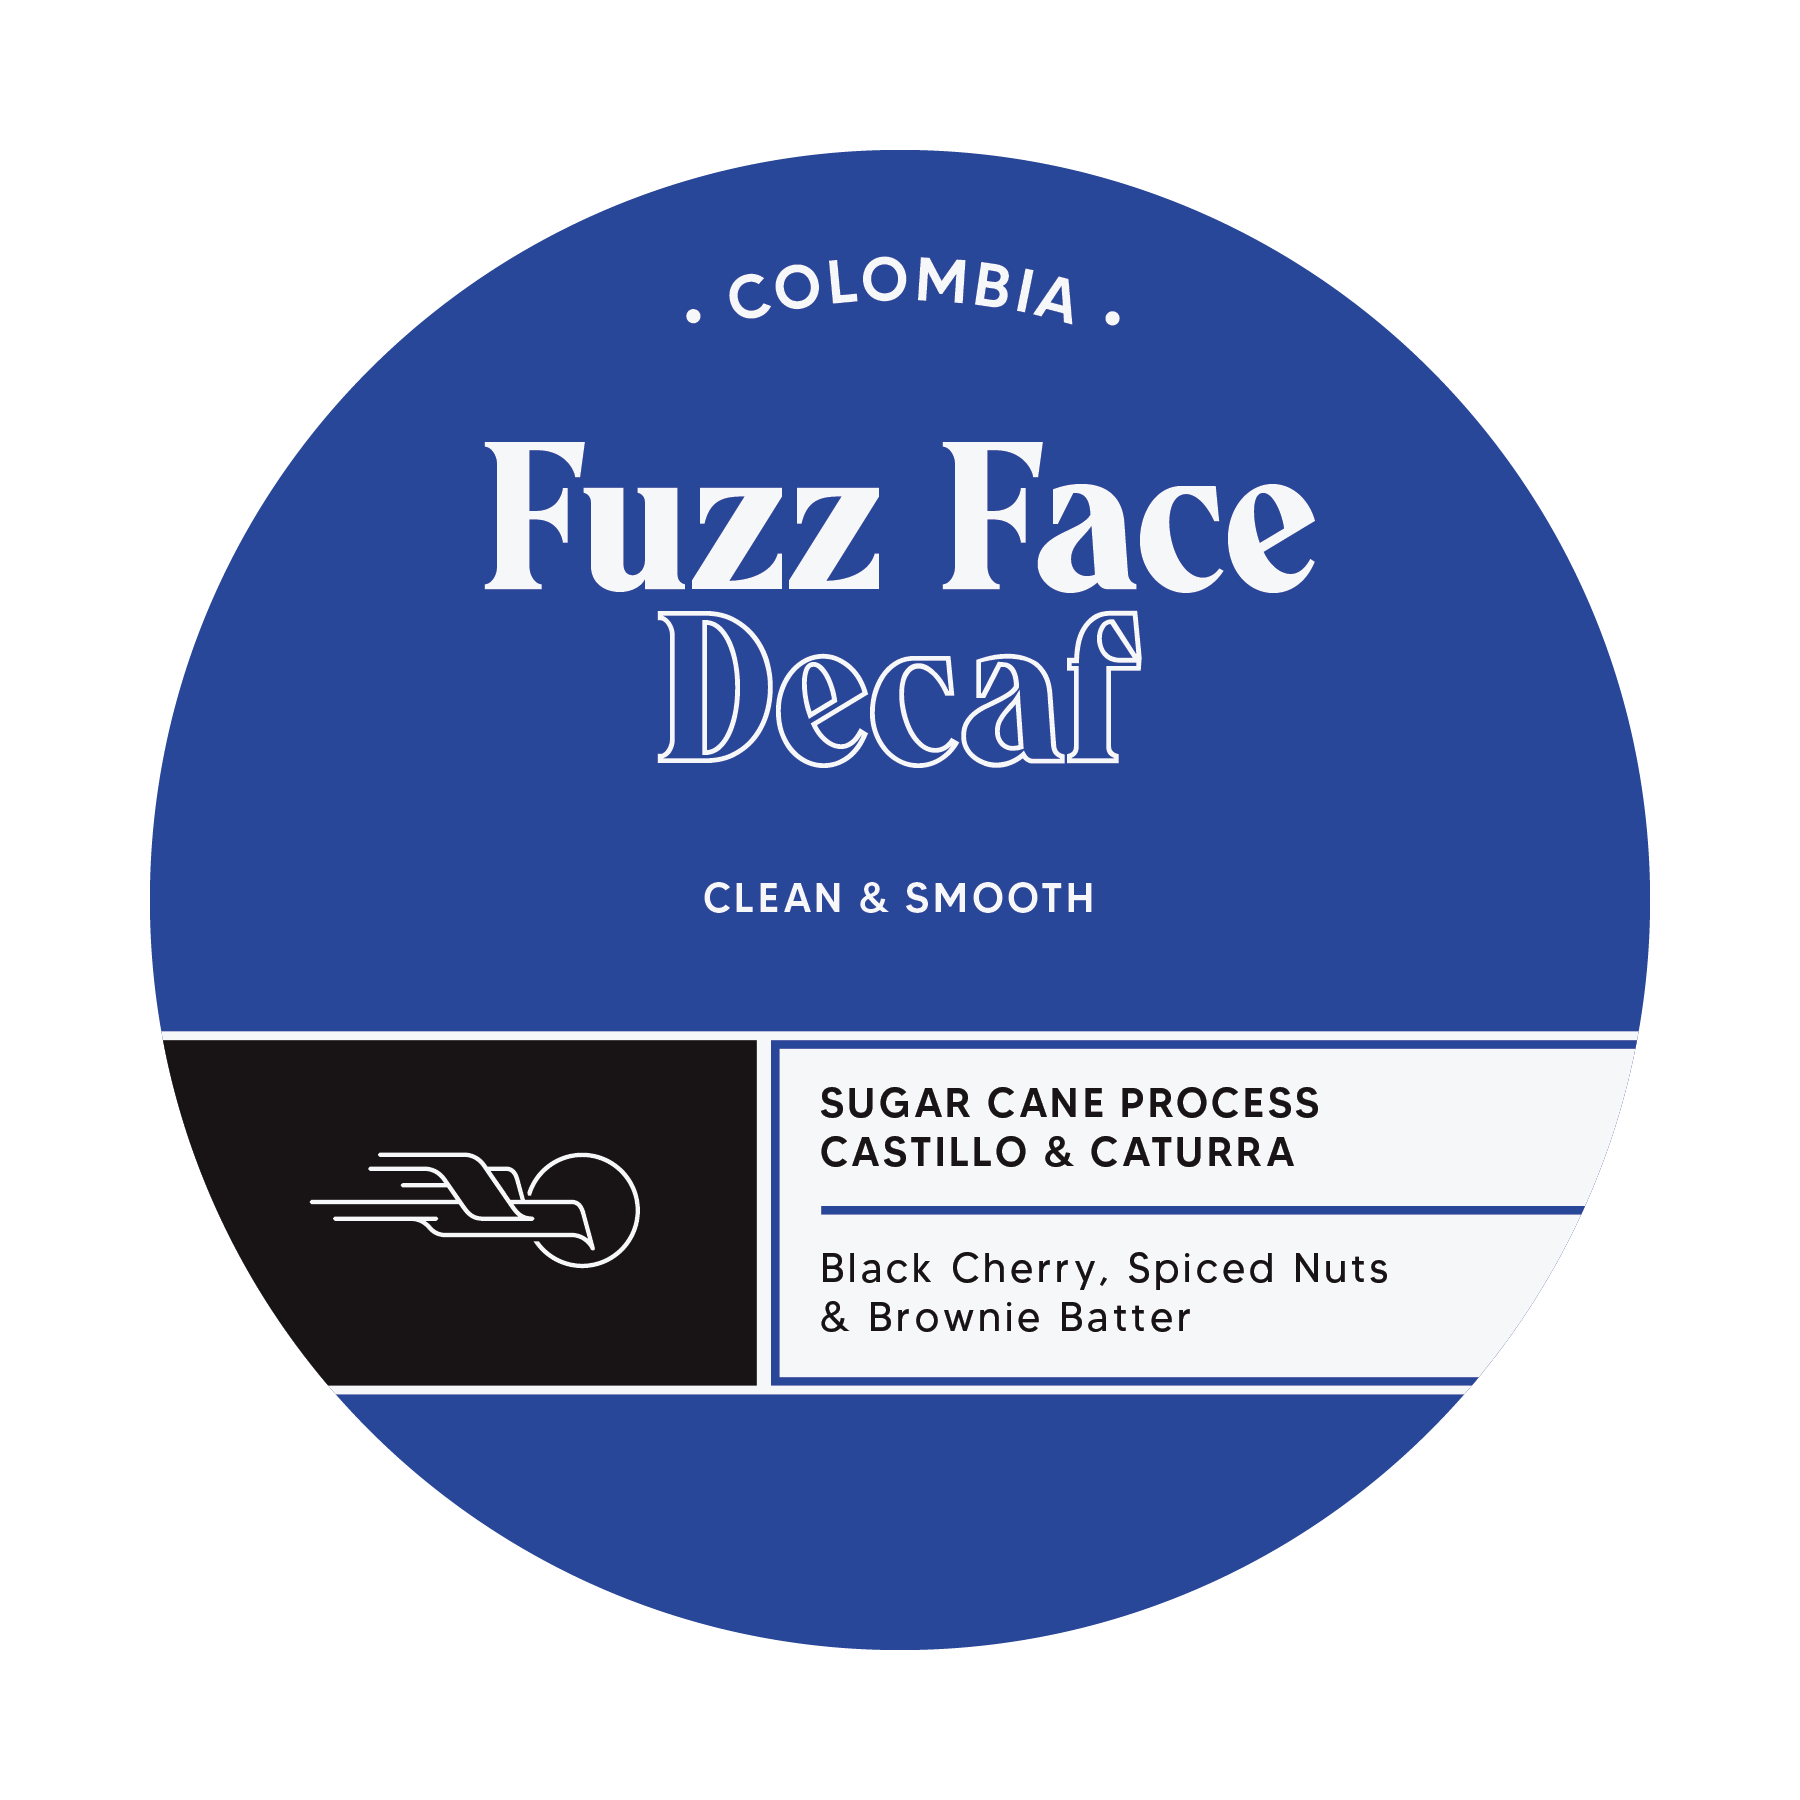 Fuzz Face - Decaf Colombia